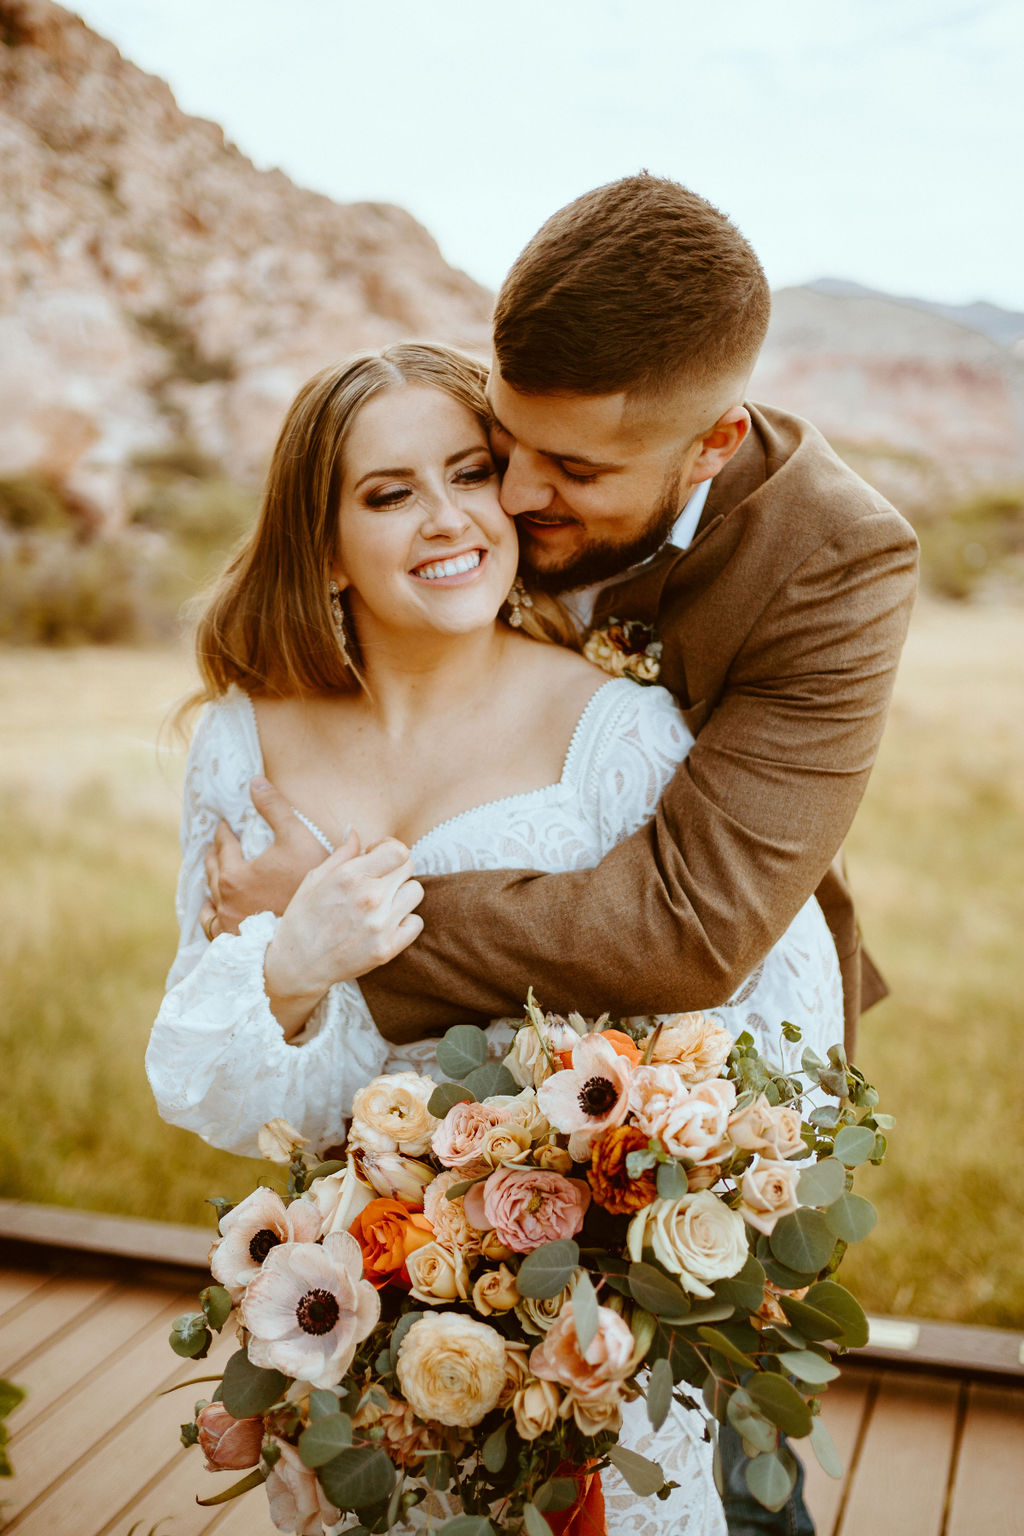 Rustic Boho Never Looked So Good! Groom has his arms wrapped around the bride holding her close nuzzling her cheek. She smiles as she holds her rustic boho bridal bouquet. 